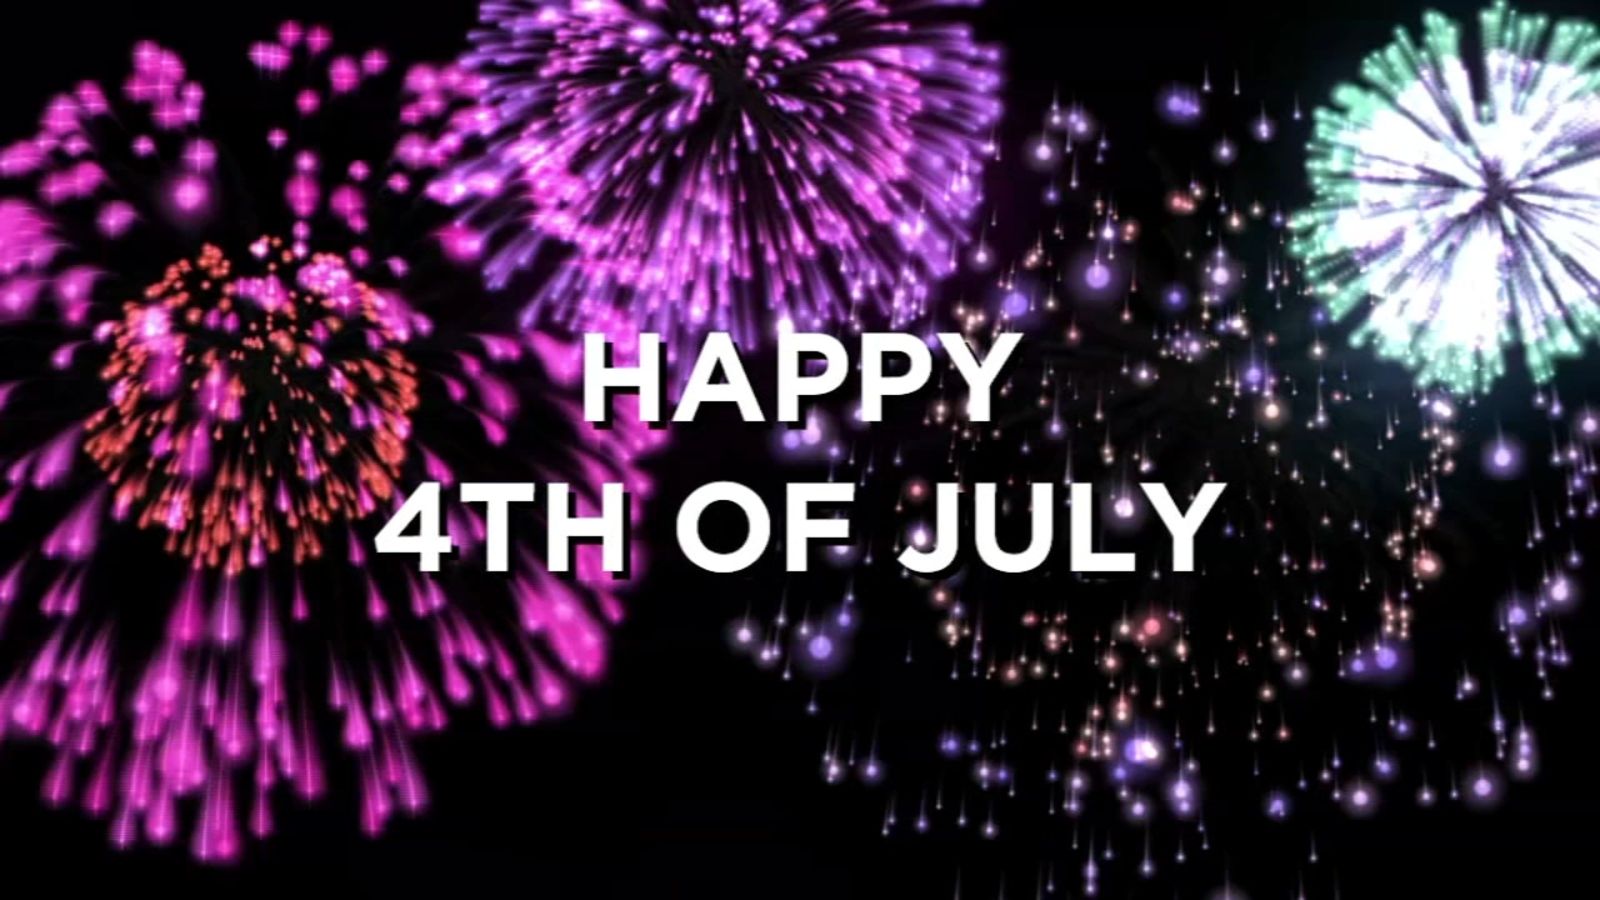 Independence Day celebrations and 4th of July fireworks shows in Fresno, Visalia, Merced and the Central Valley